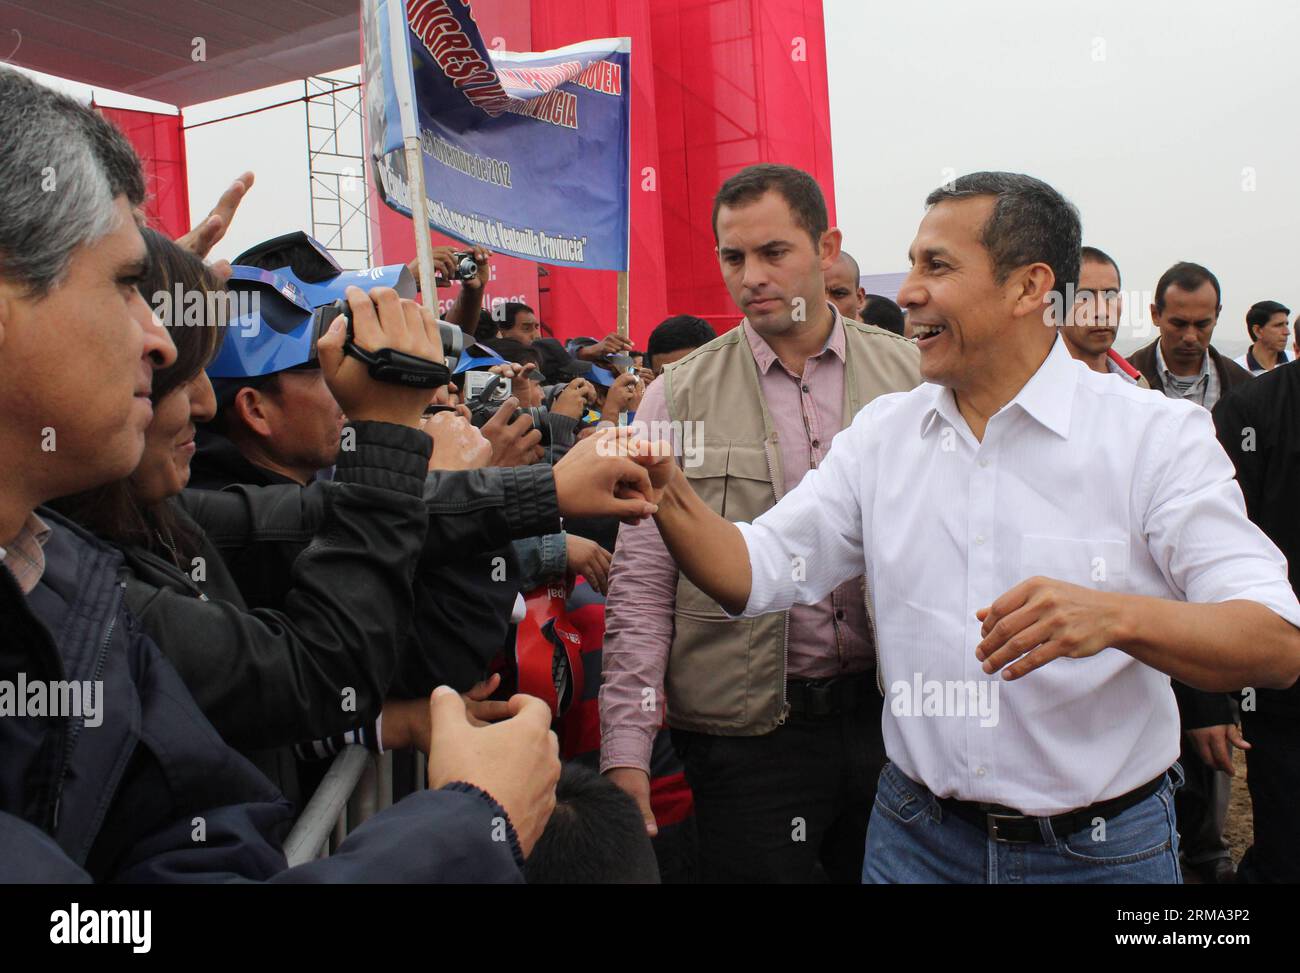 CALLAO, June 14, 2014 (Xinhua) -- President of Peru Ollanta Humala (R) greets residents during the ceremony of the start of works of expansion and improvement system of drinking water and sewer for the Pachacutec Macro Project , in the district of Ventanilla, Constitutional of Callao Province, department of Lima, Peru, on June 14, 2014. The project will provide that more than 230,000 people to have drinking water and sewer in their homes, according to local press. (Xinhua/Luis Camacho) (jp) PERU-CALLAO-POLITICS-HUMALA PUBLICATIONxNOTxINxCHN   Callao June 14 2014 XINHUA President of Peru Ollant Stock Photo